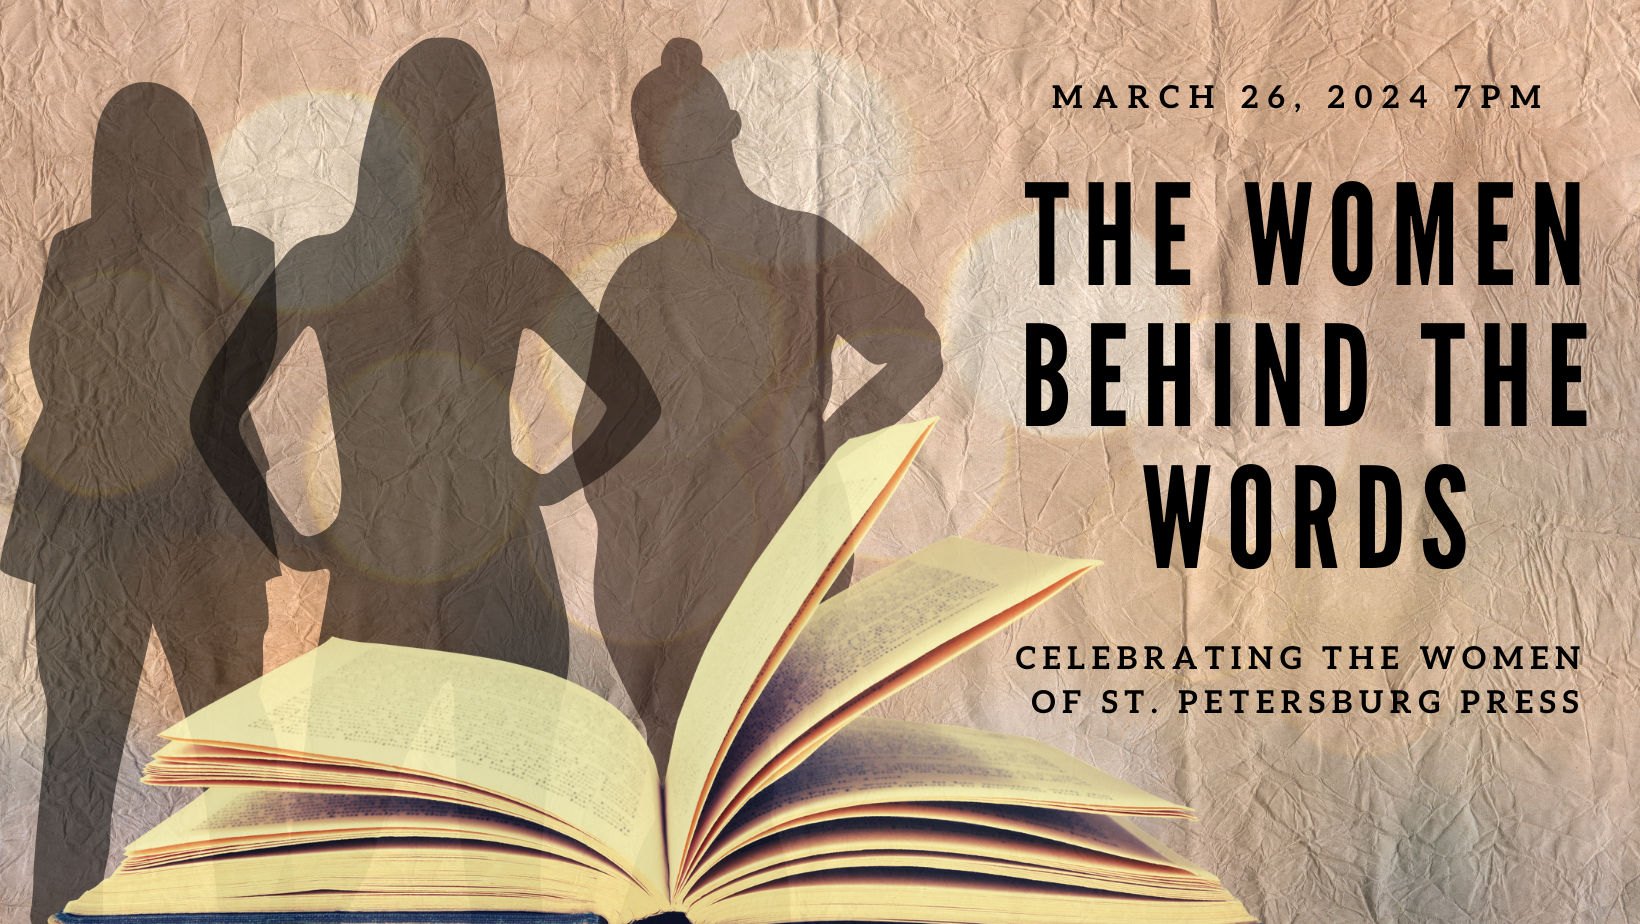 The Women Behind the Words: Celebrating the Women of St. Petersburg Press